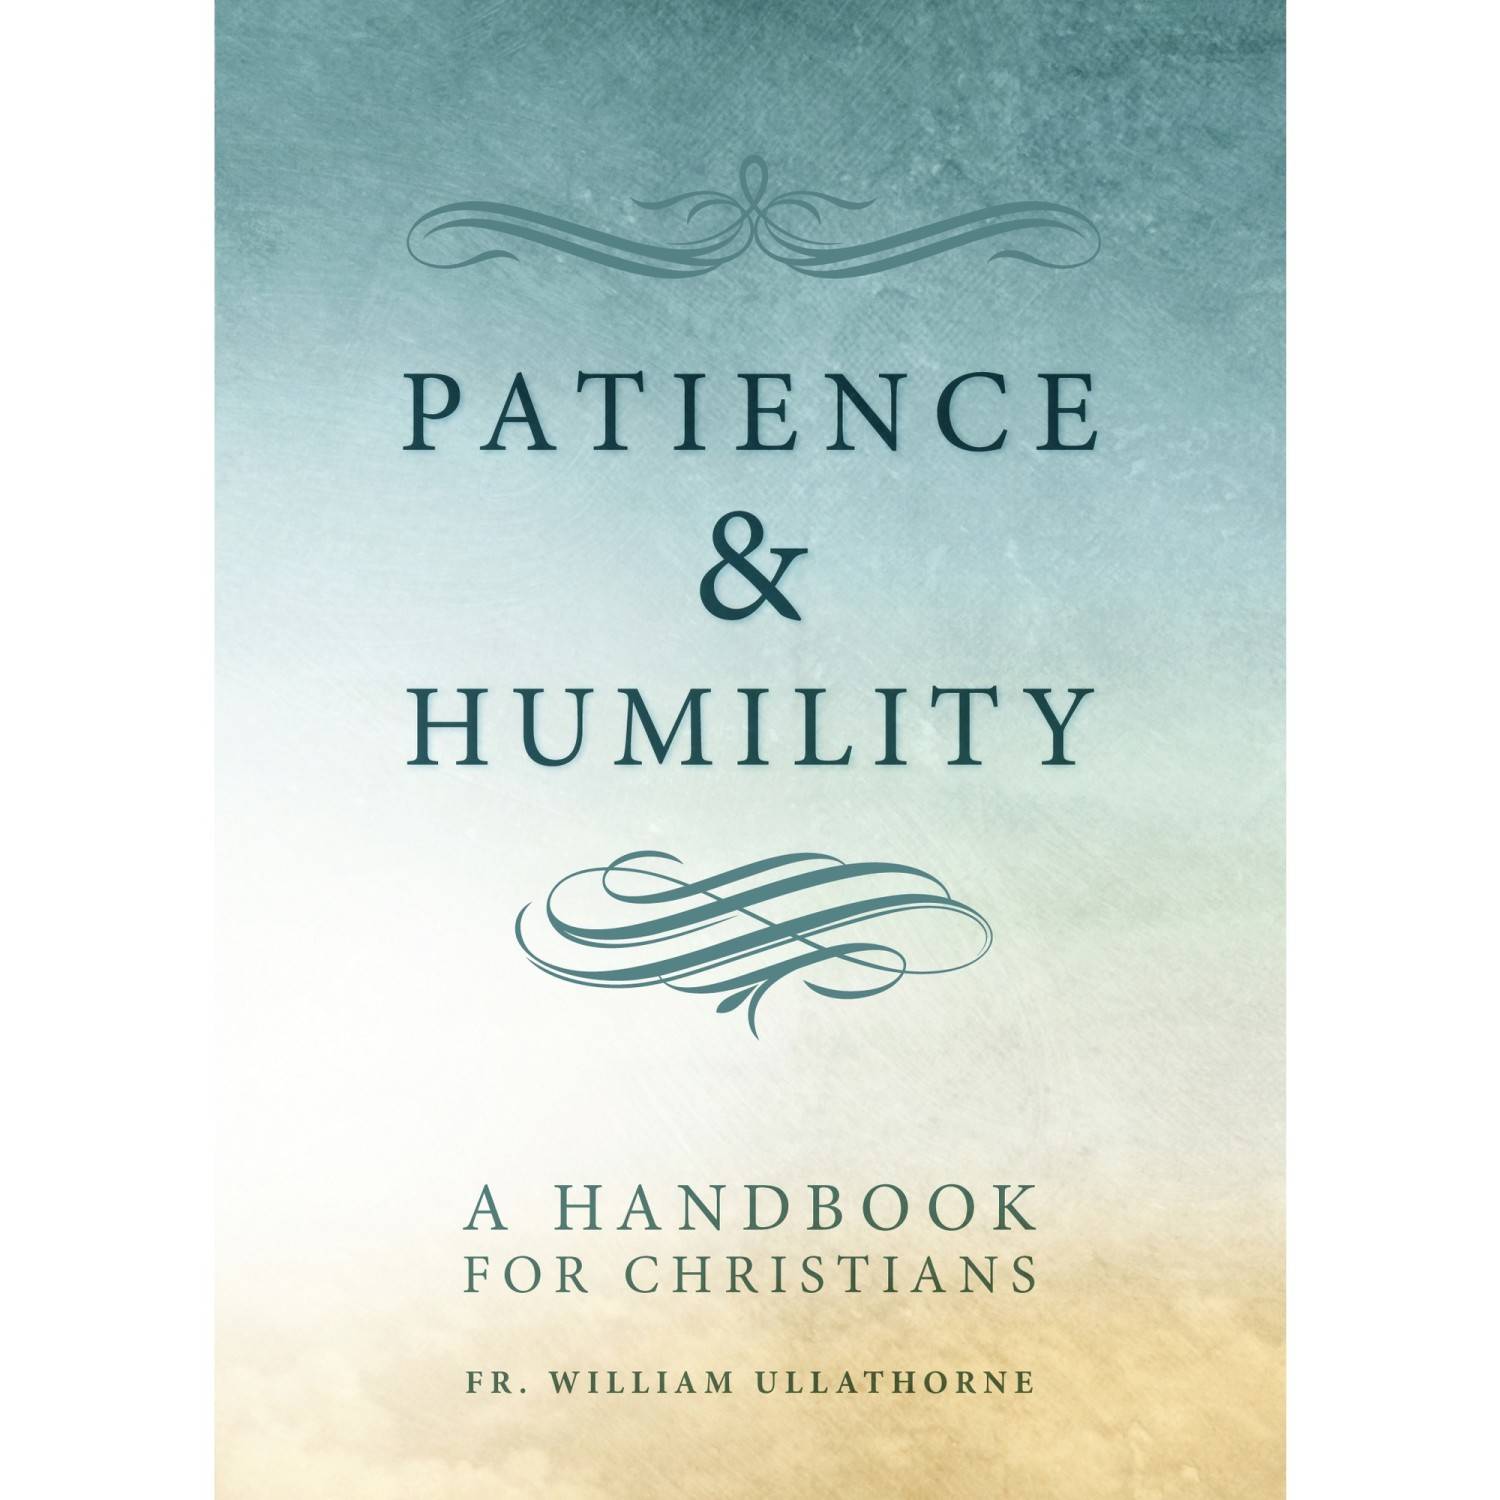 Patience & Humility - A Handbook for Christians